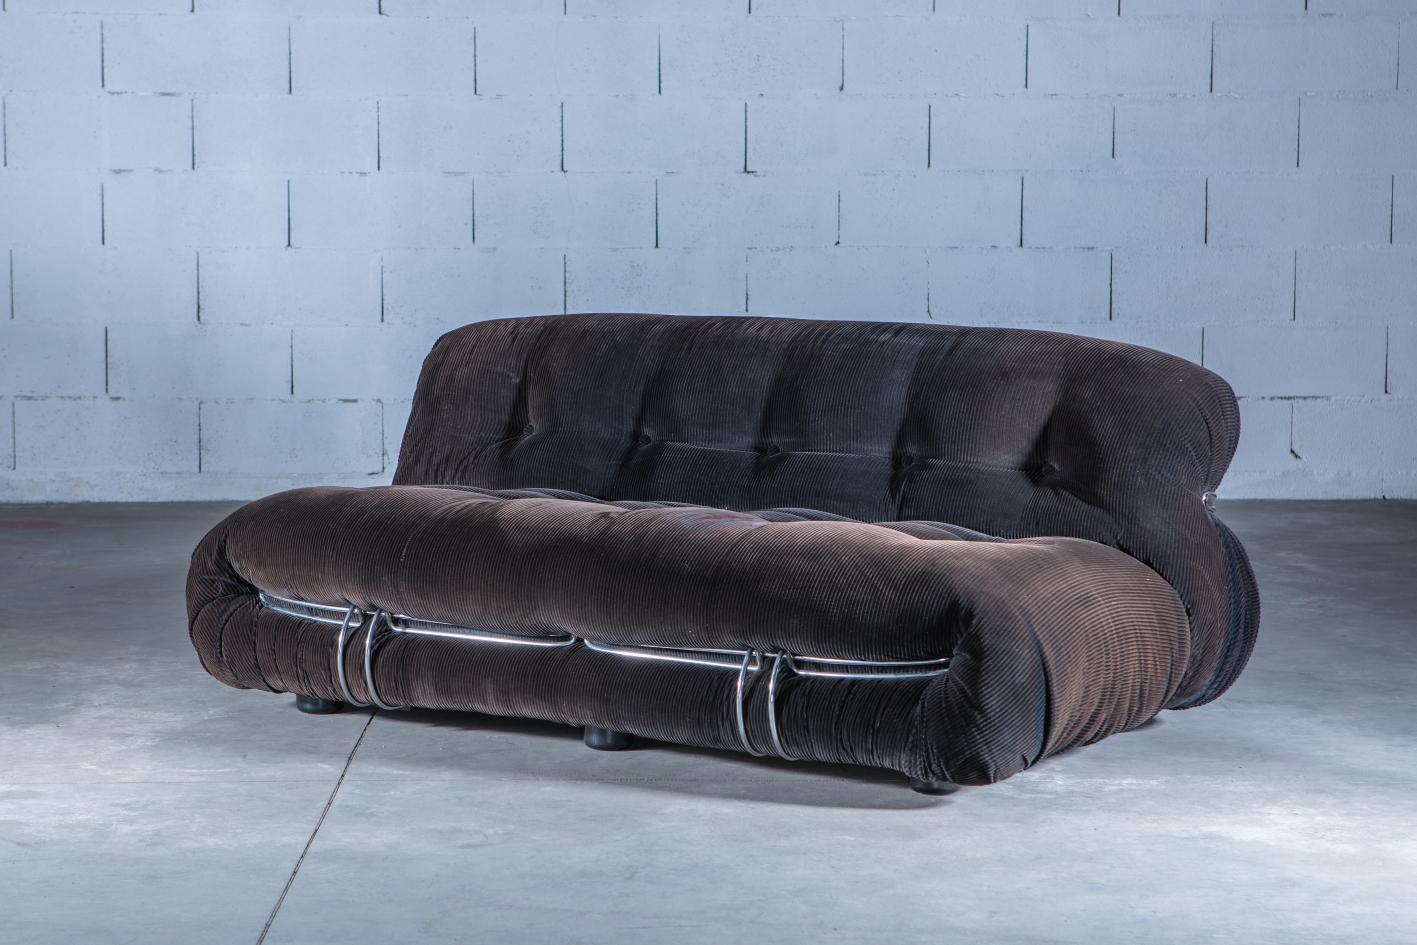 A two-seat ‘Soriana’ sofa, designed in the 1970s by Afra and Tobia Scarpa and produced by Cassina. Chromed metal rod structure and original courdroy fabric and makers label intact. The fabric shows wear and minor damage (see final photo) which is